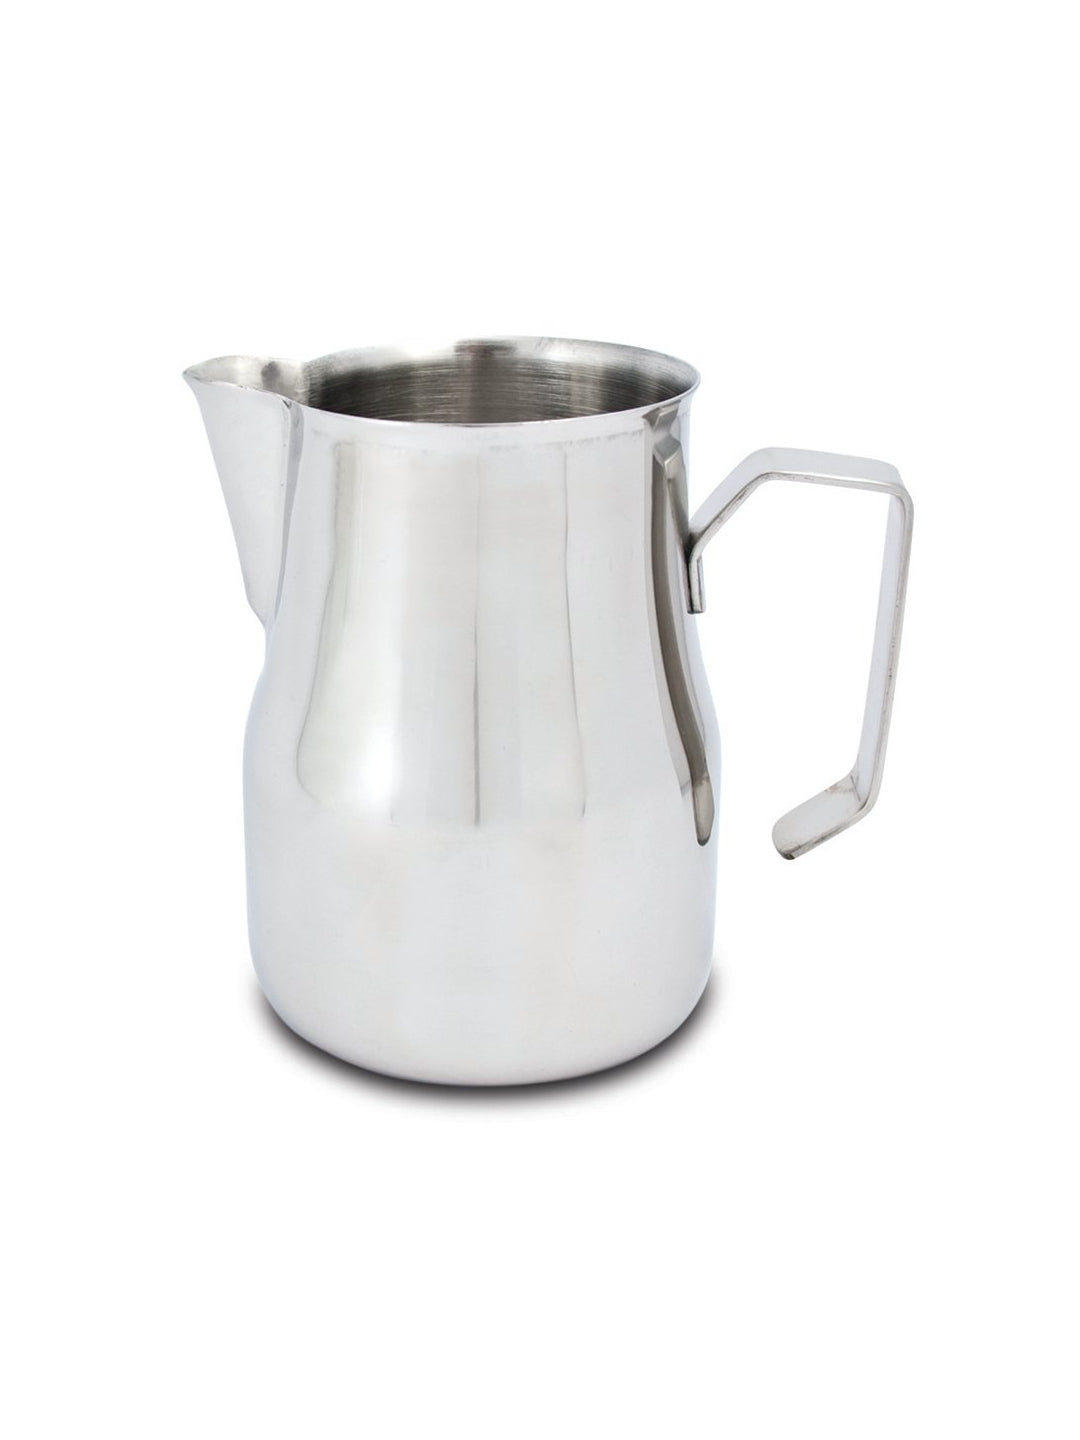 Cuisinox stainless steel milk pitcher with pouring spout 465 ml